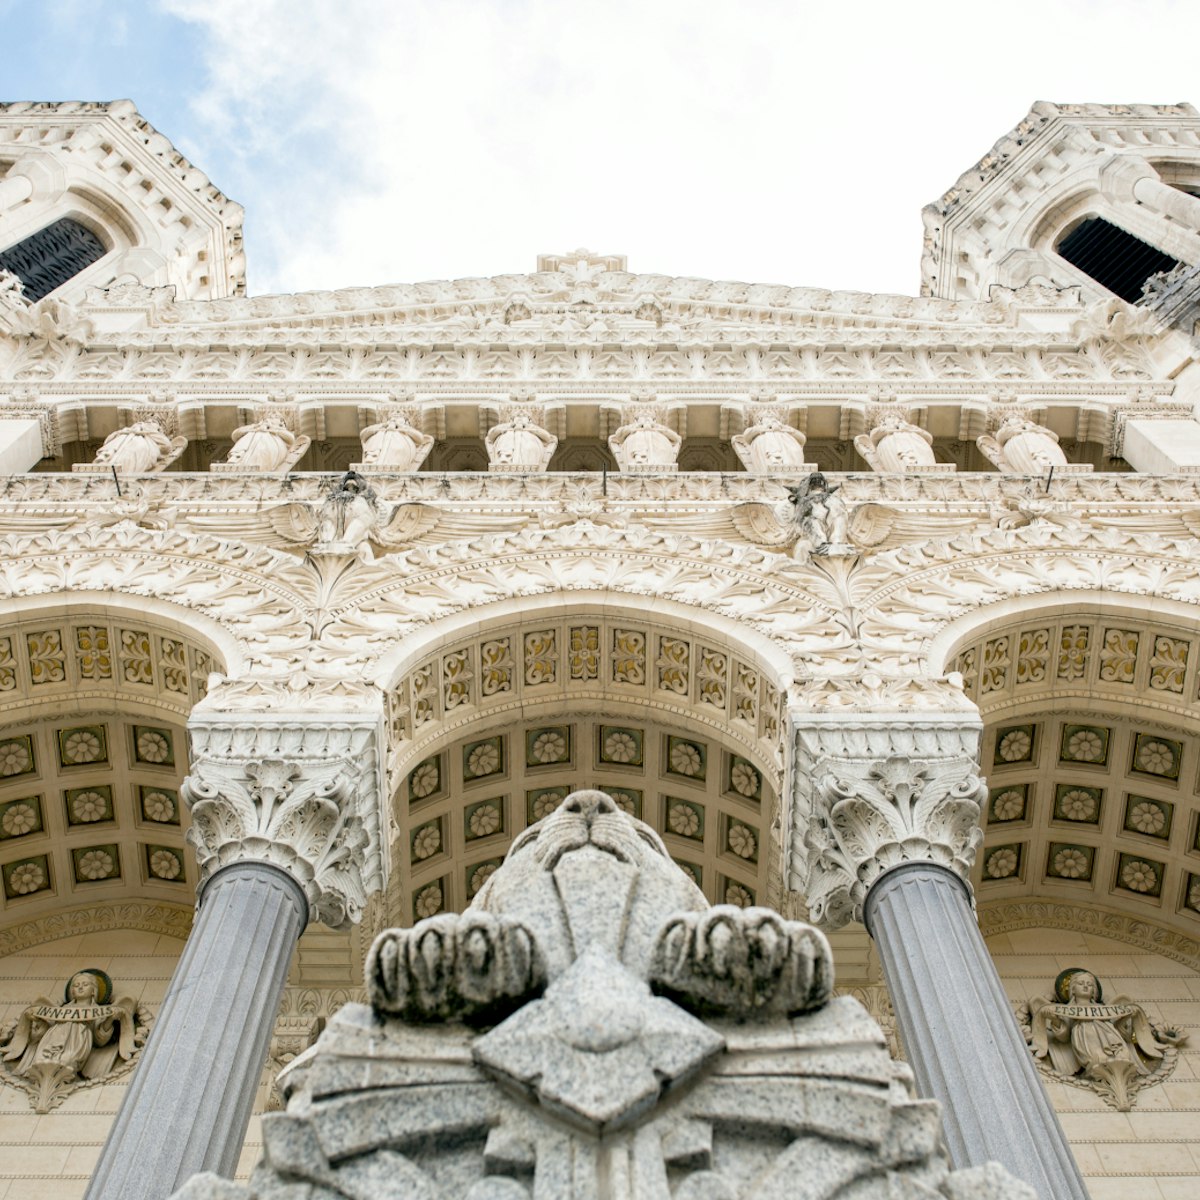 White stone facade of the Basilica of Notre-Dame de Fourvière in Lyon, France.; Shutterstock ID 786537211; Your name (First / Last): Daniel Fahey; GL account no.: 65050; Netsuite department name: Online Editorial; Full Product or Project name including edition: Lyon BiT